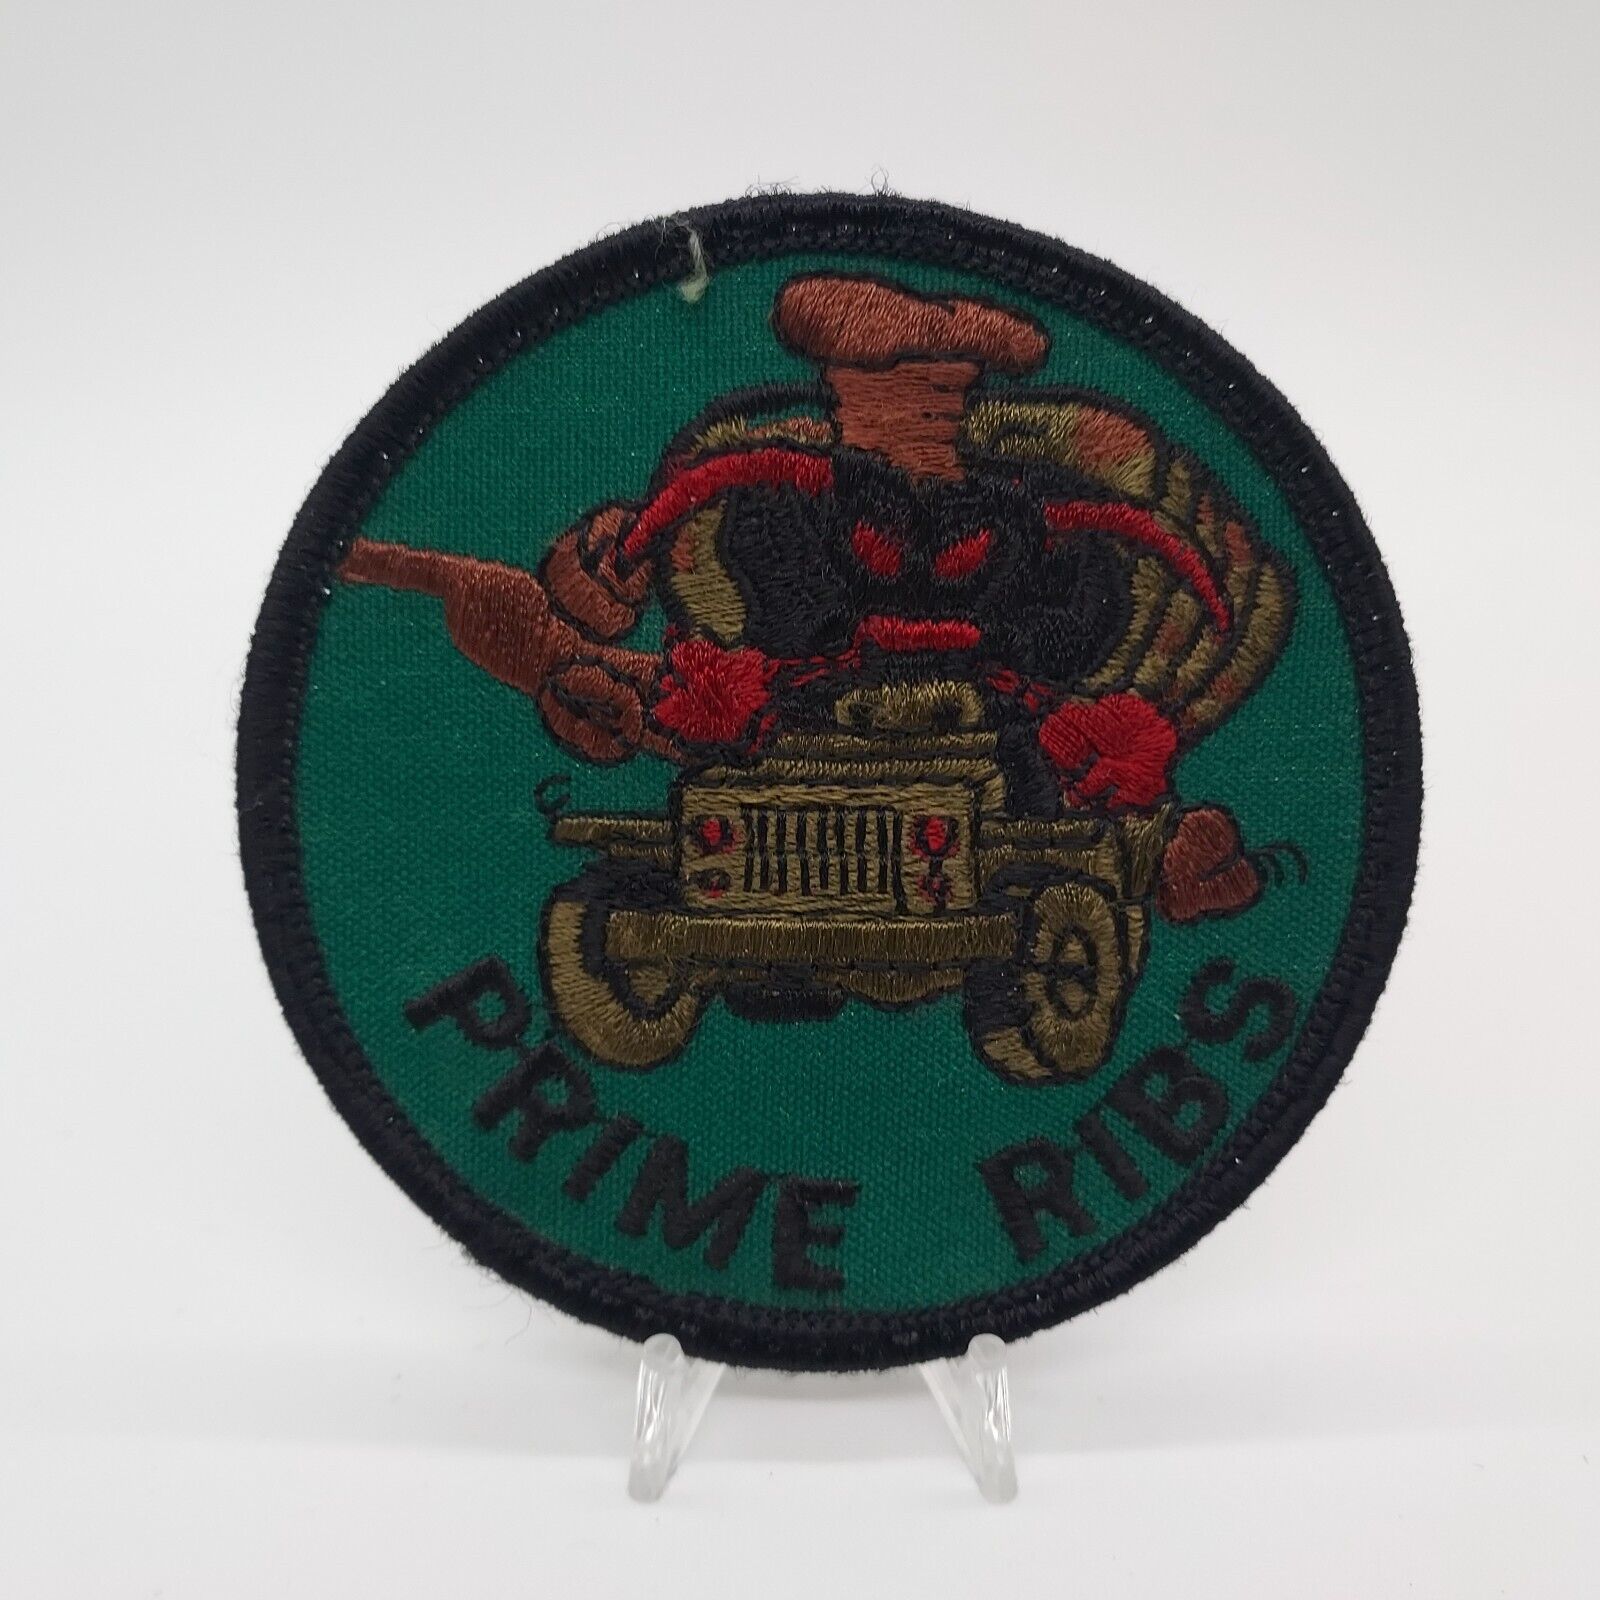 Primary image for Vintage US Air Force Civil Engineering Jeep on Green Prime Ribs Patch